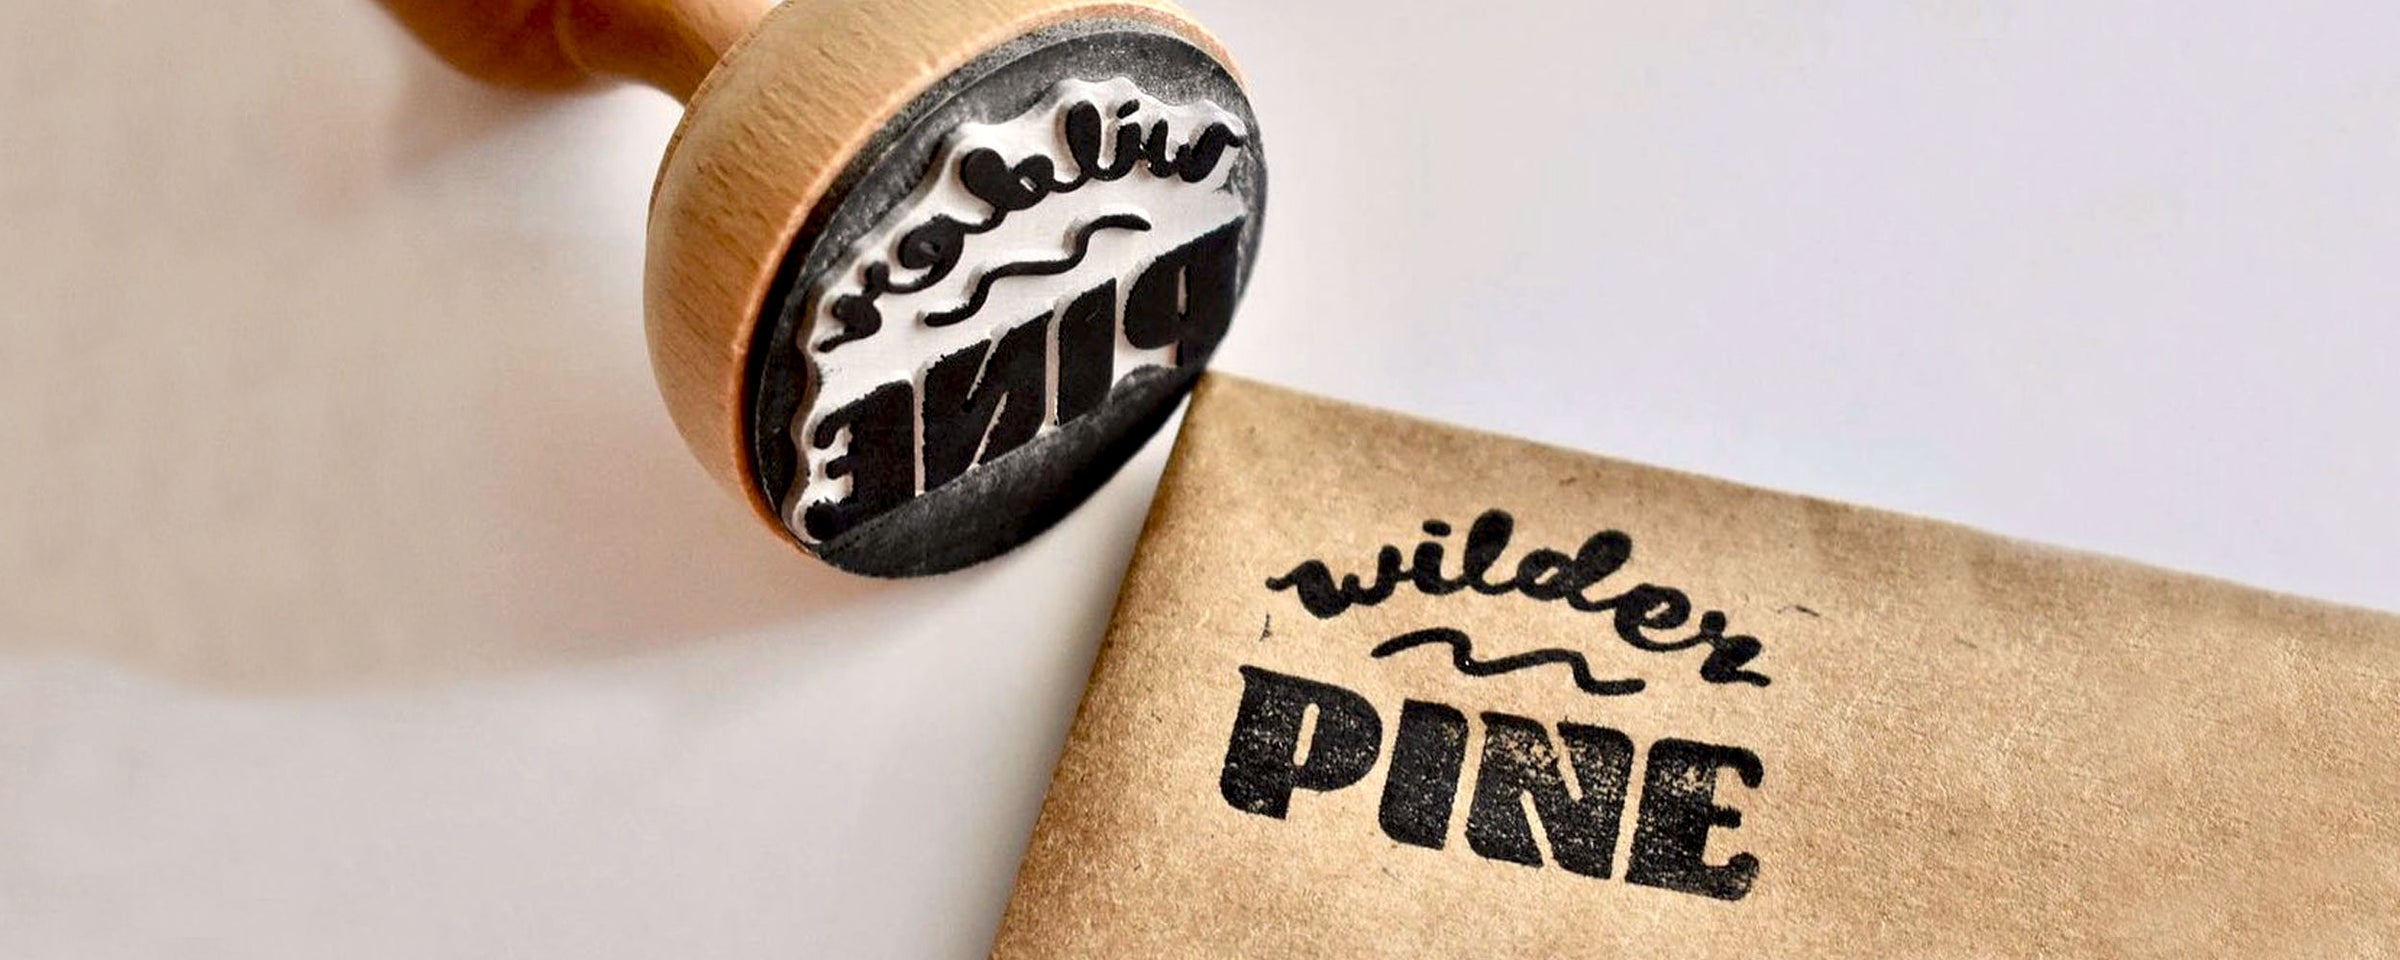 customized rubber stamp with Wilder Pine logo imprinted on a brown parchment paper